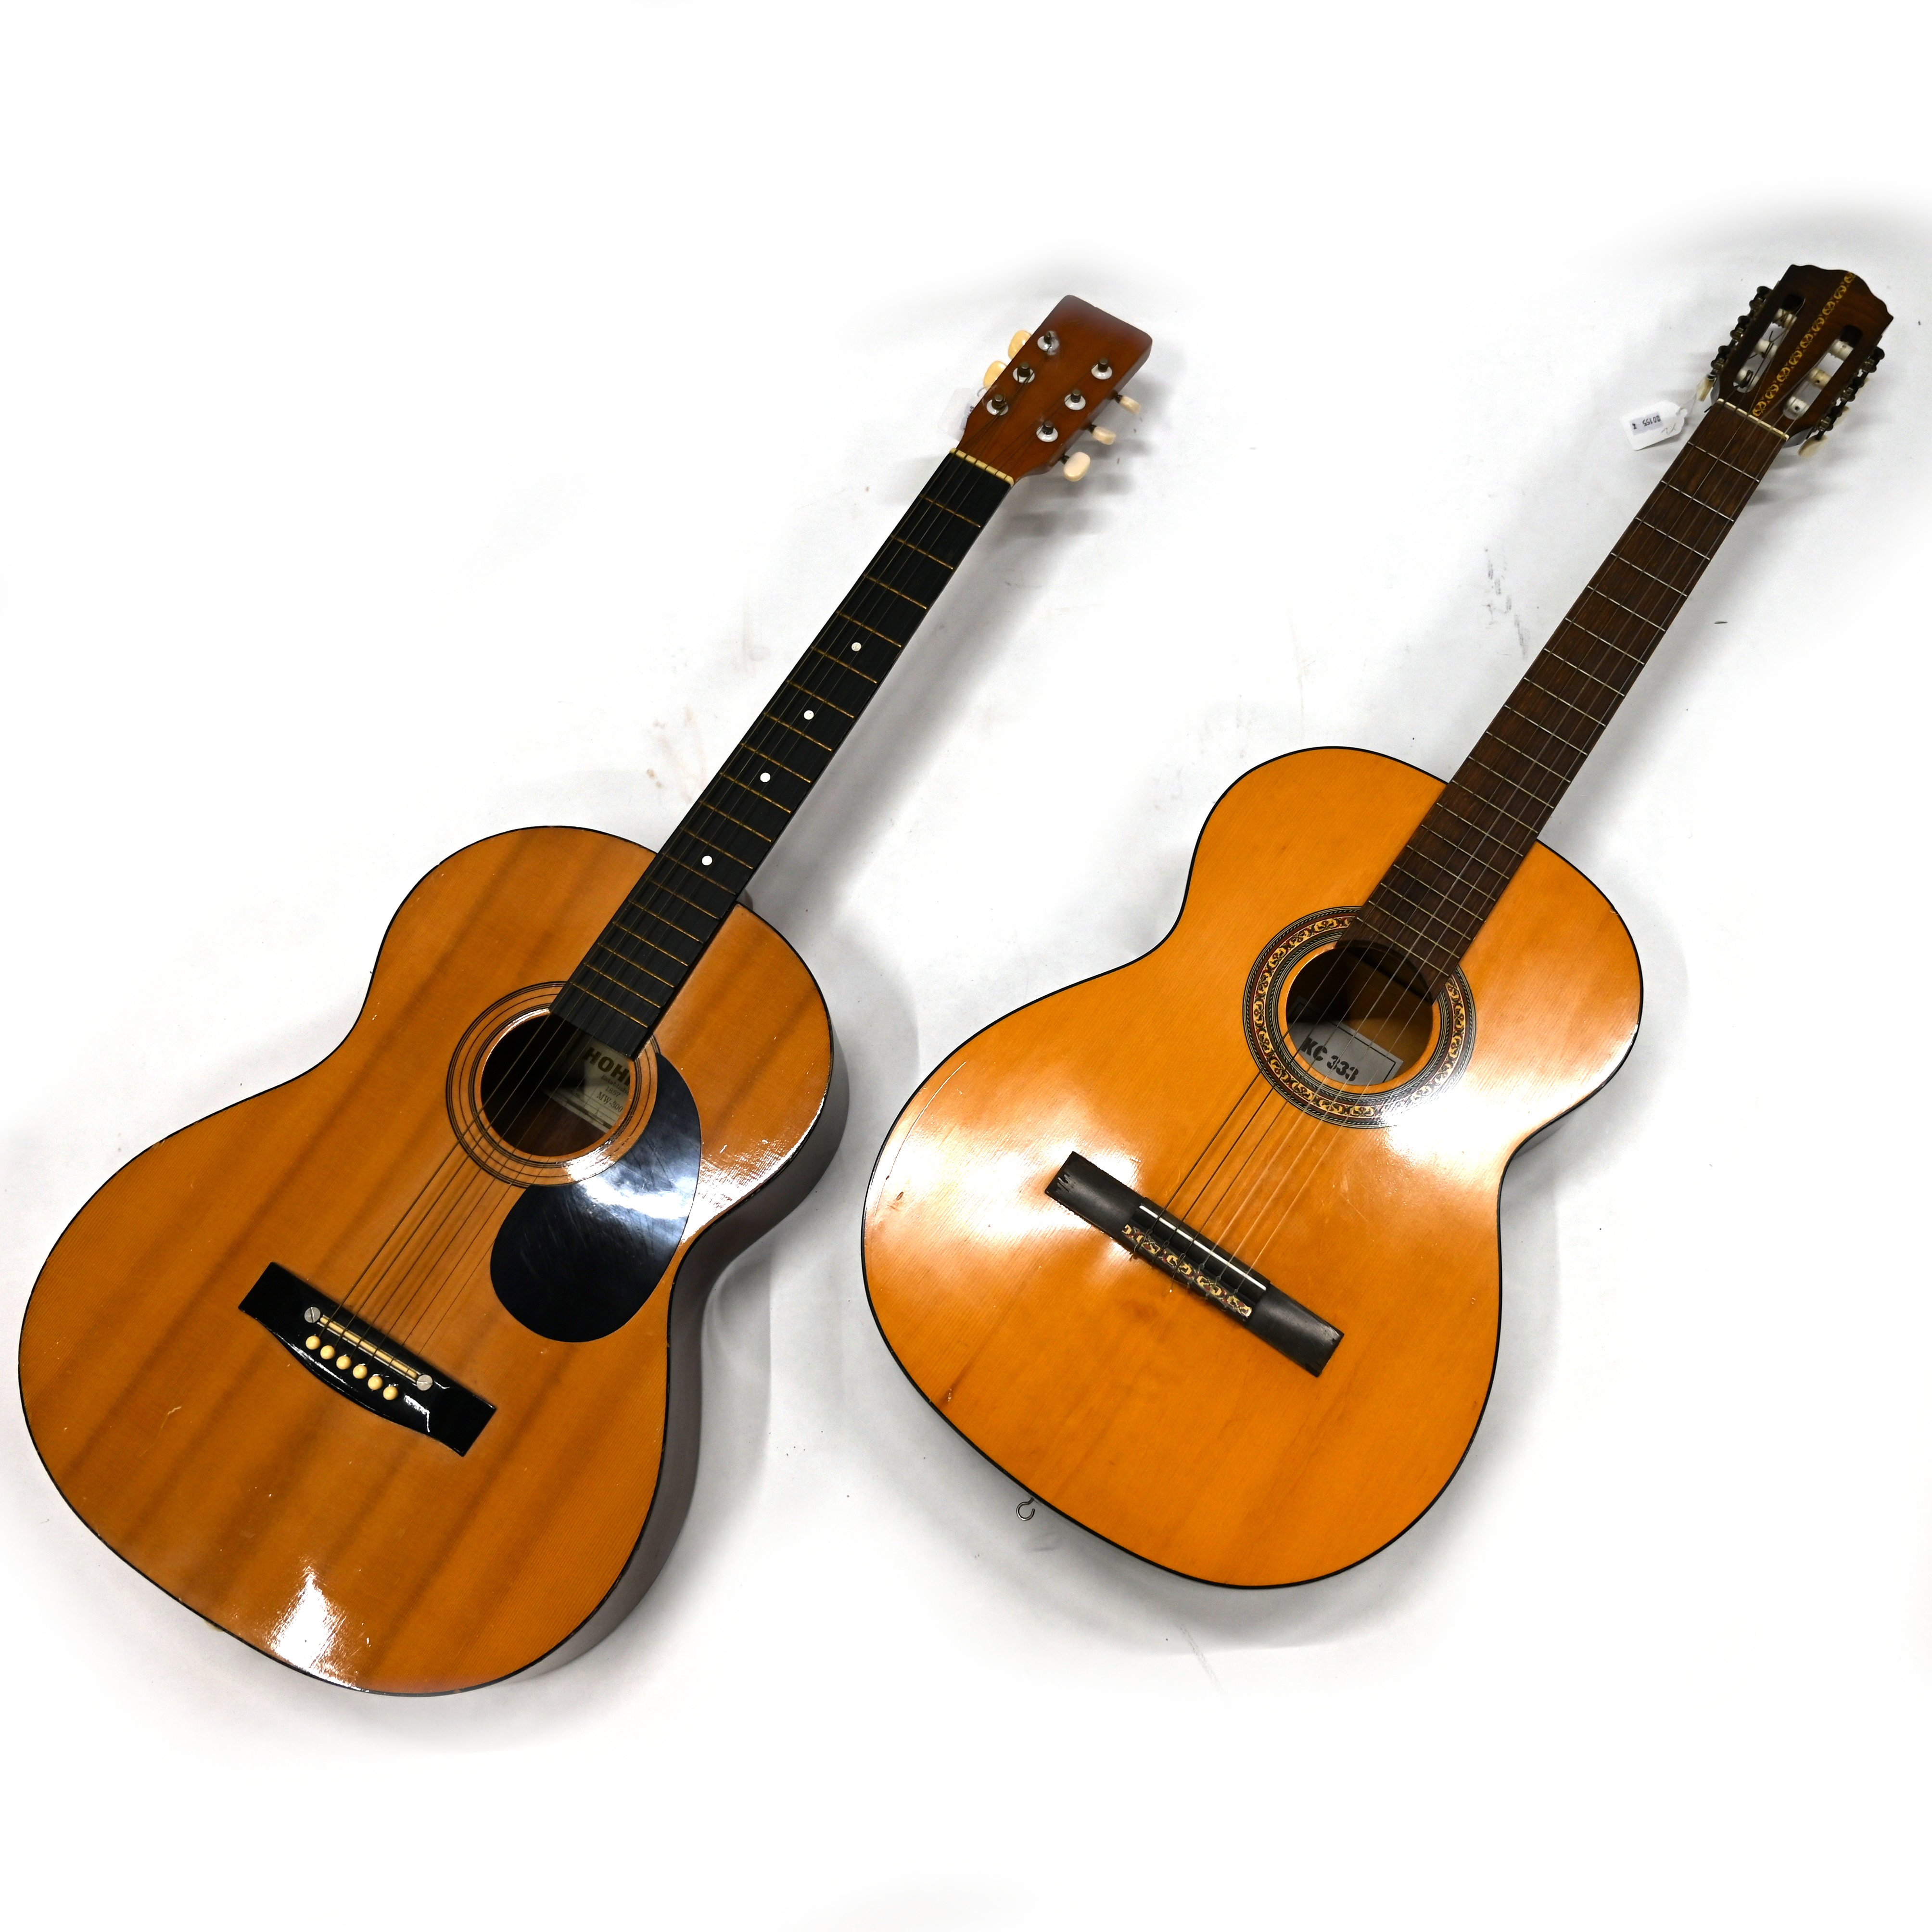 A Horner MW - 300 acoustic guitar, along with a Spanish KC 33 guitar. (2)